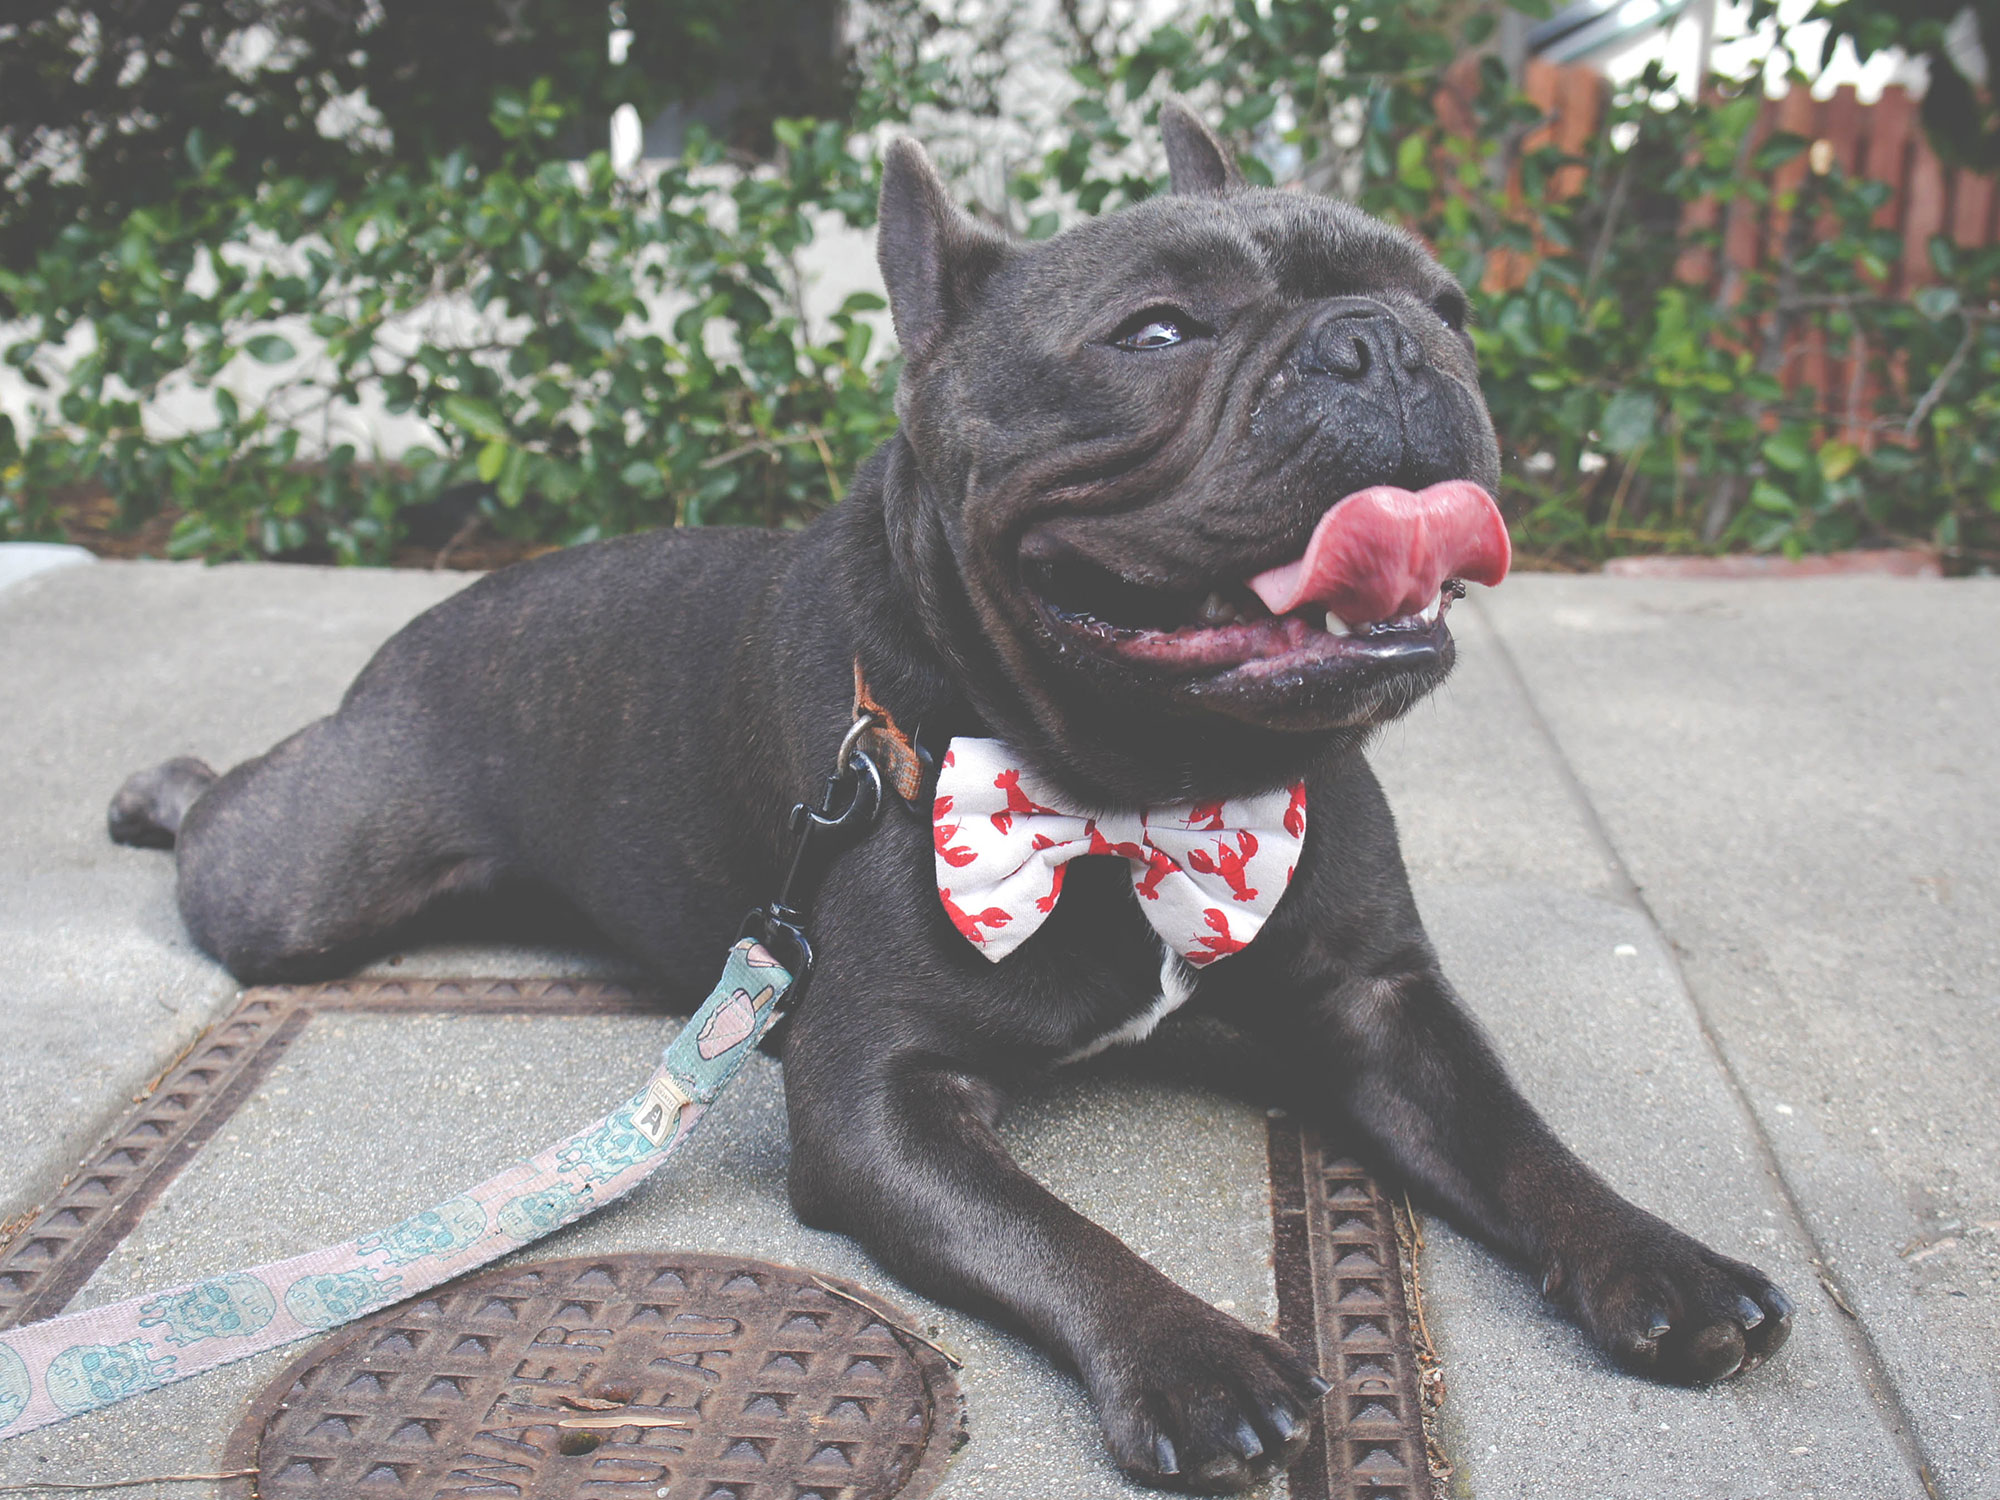 Dog with bow tie laying on concrete